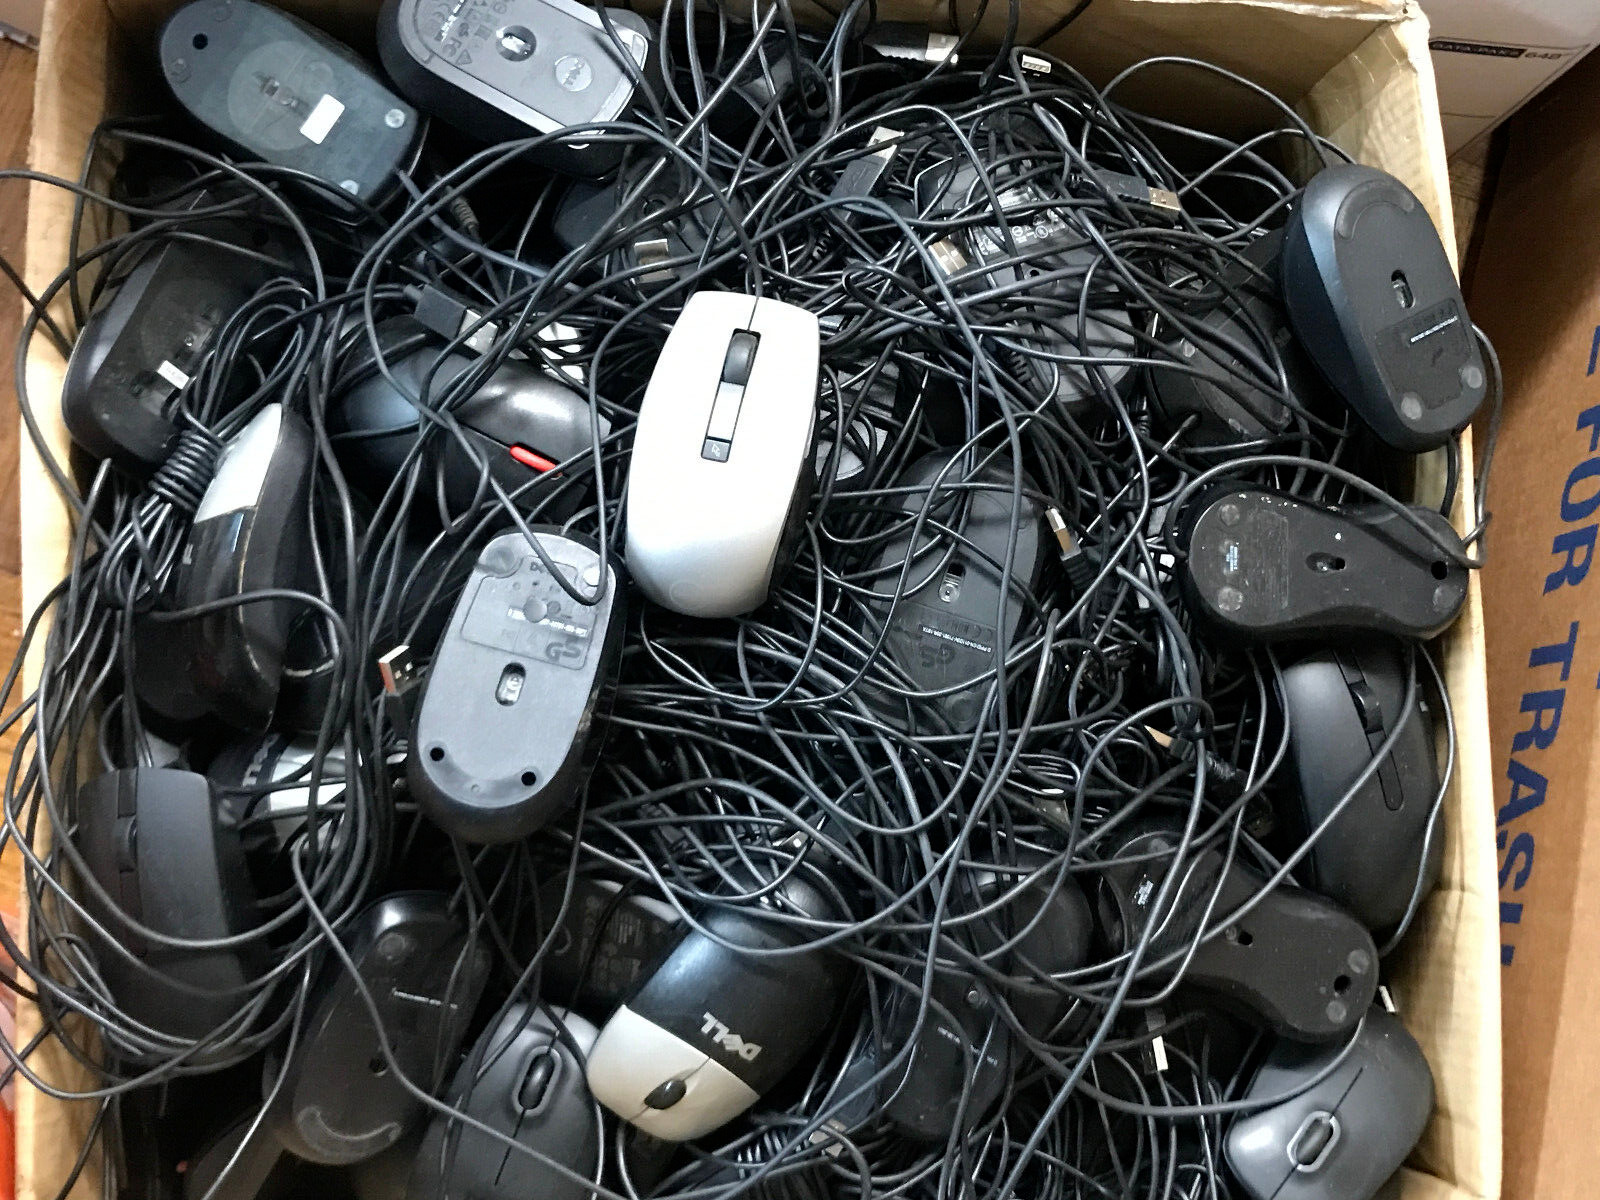 Lot of 50 Mixed Lot of USB Wired Mice HP, Dell, Microsoft, Logitect-Major brands